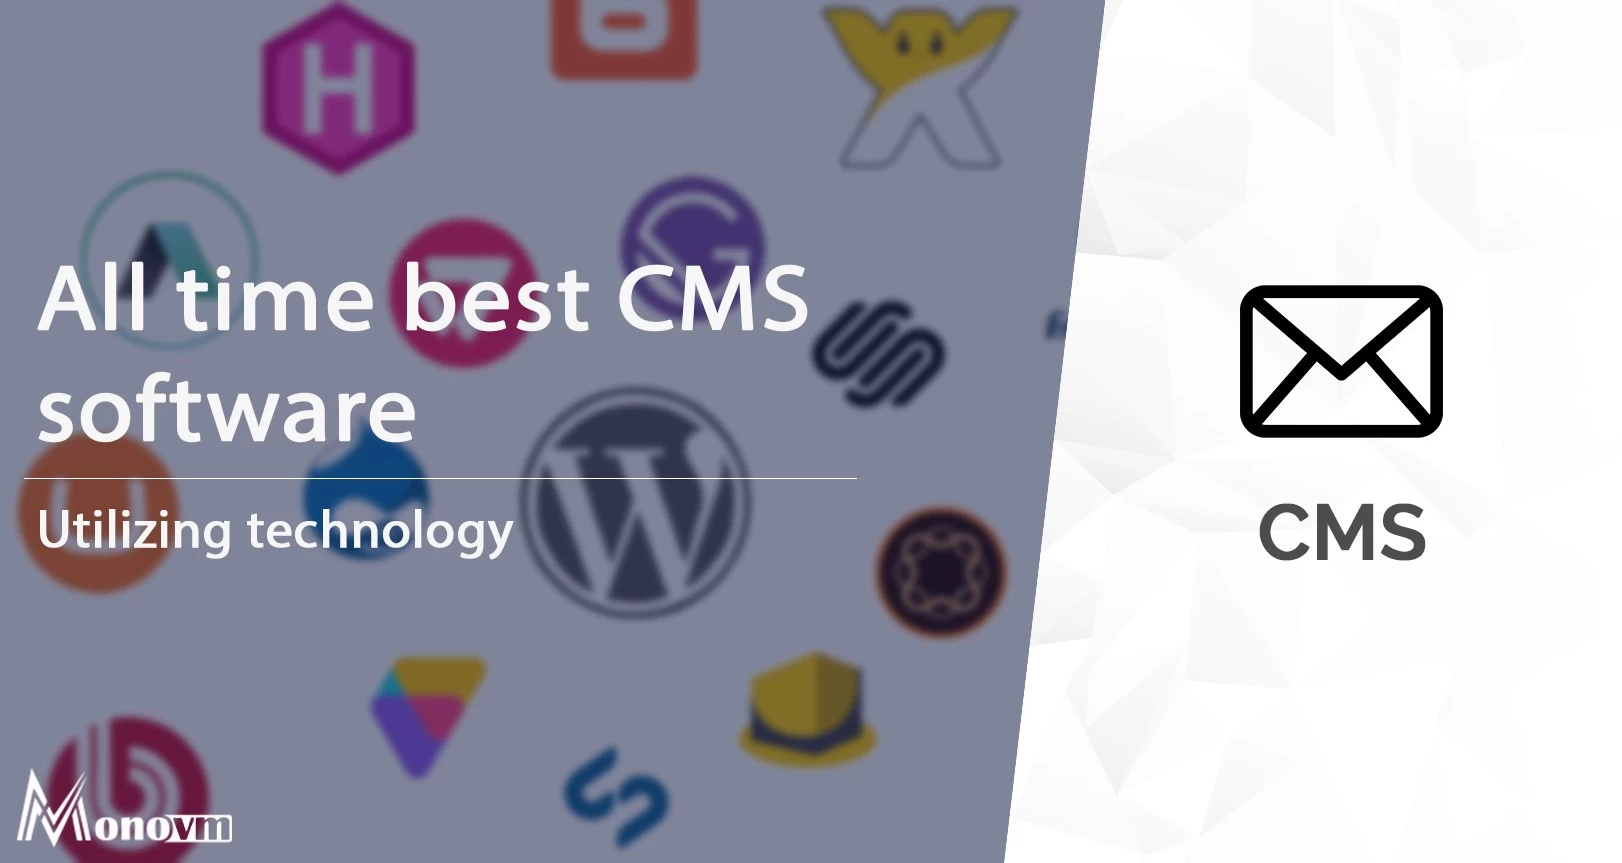 All time Best CMS software